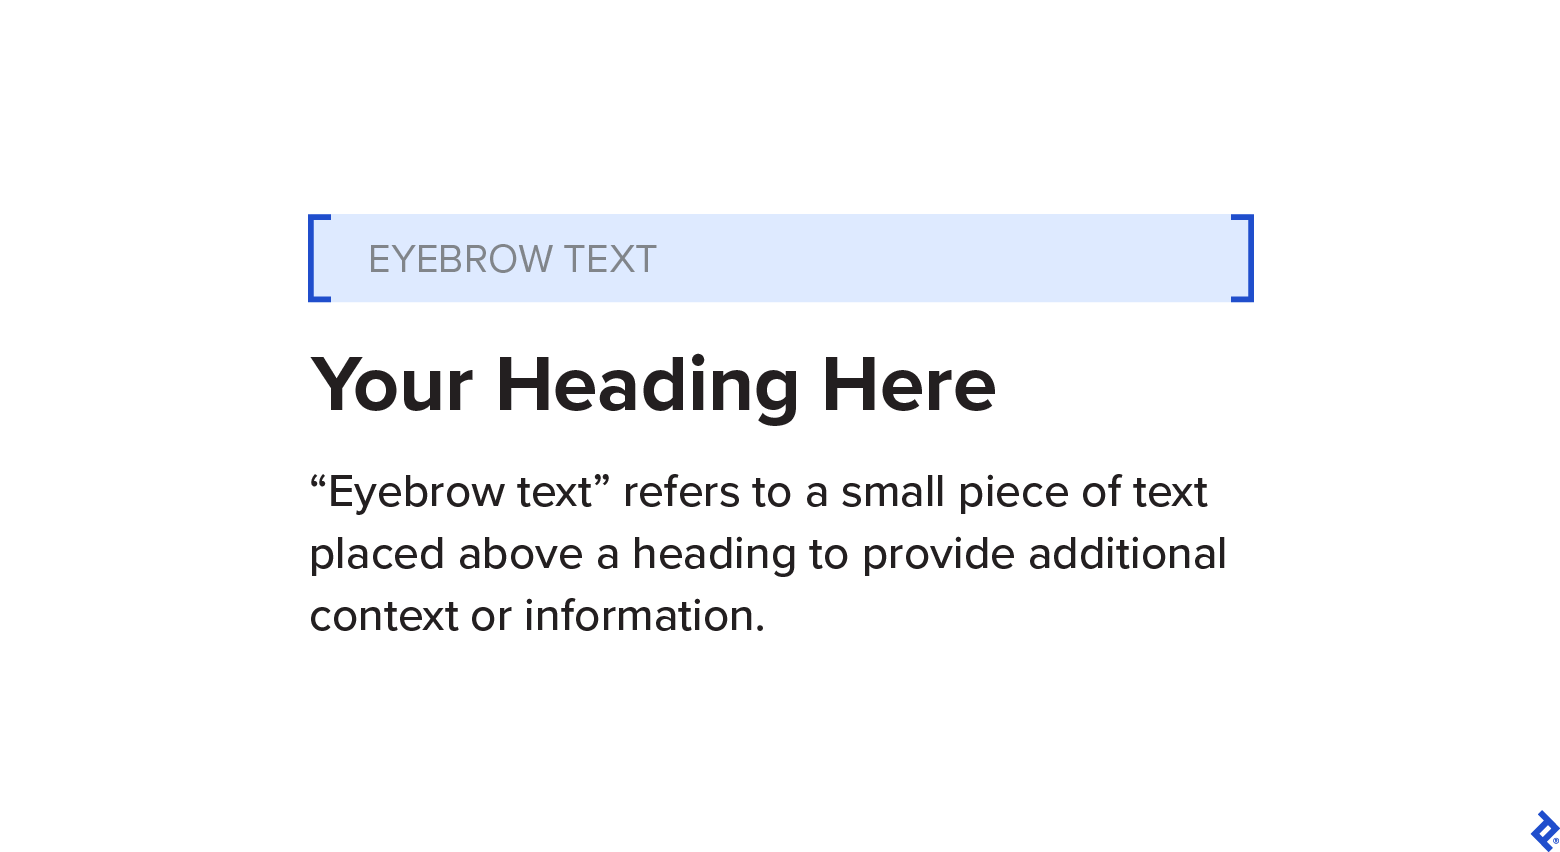 An example of eyebrow text sits above a brief contextual description, and guides readers to the heading “Your Heading Here.”